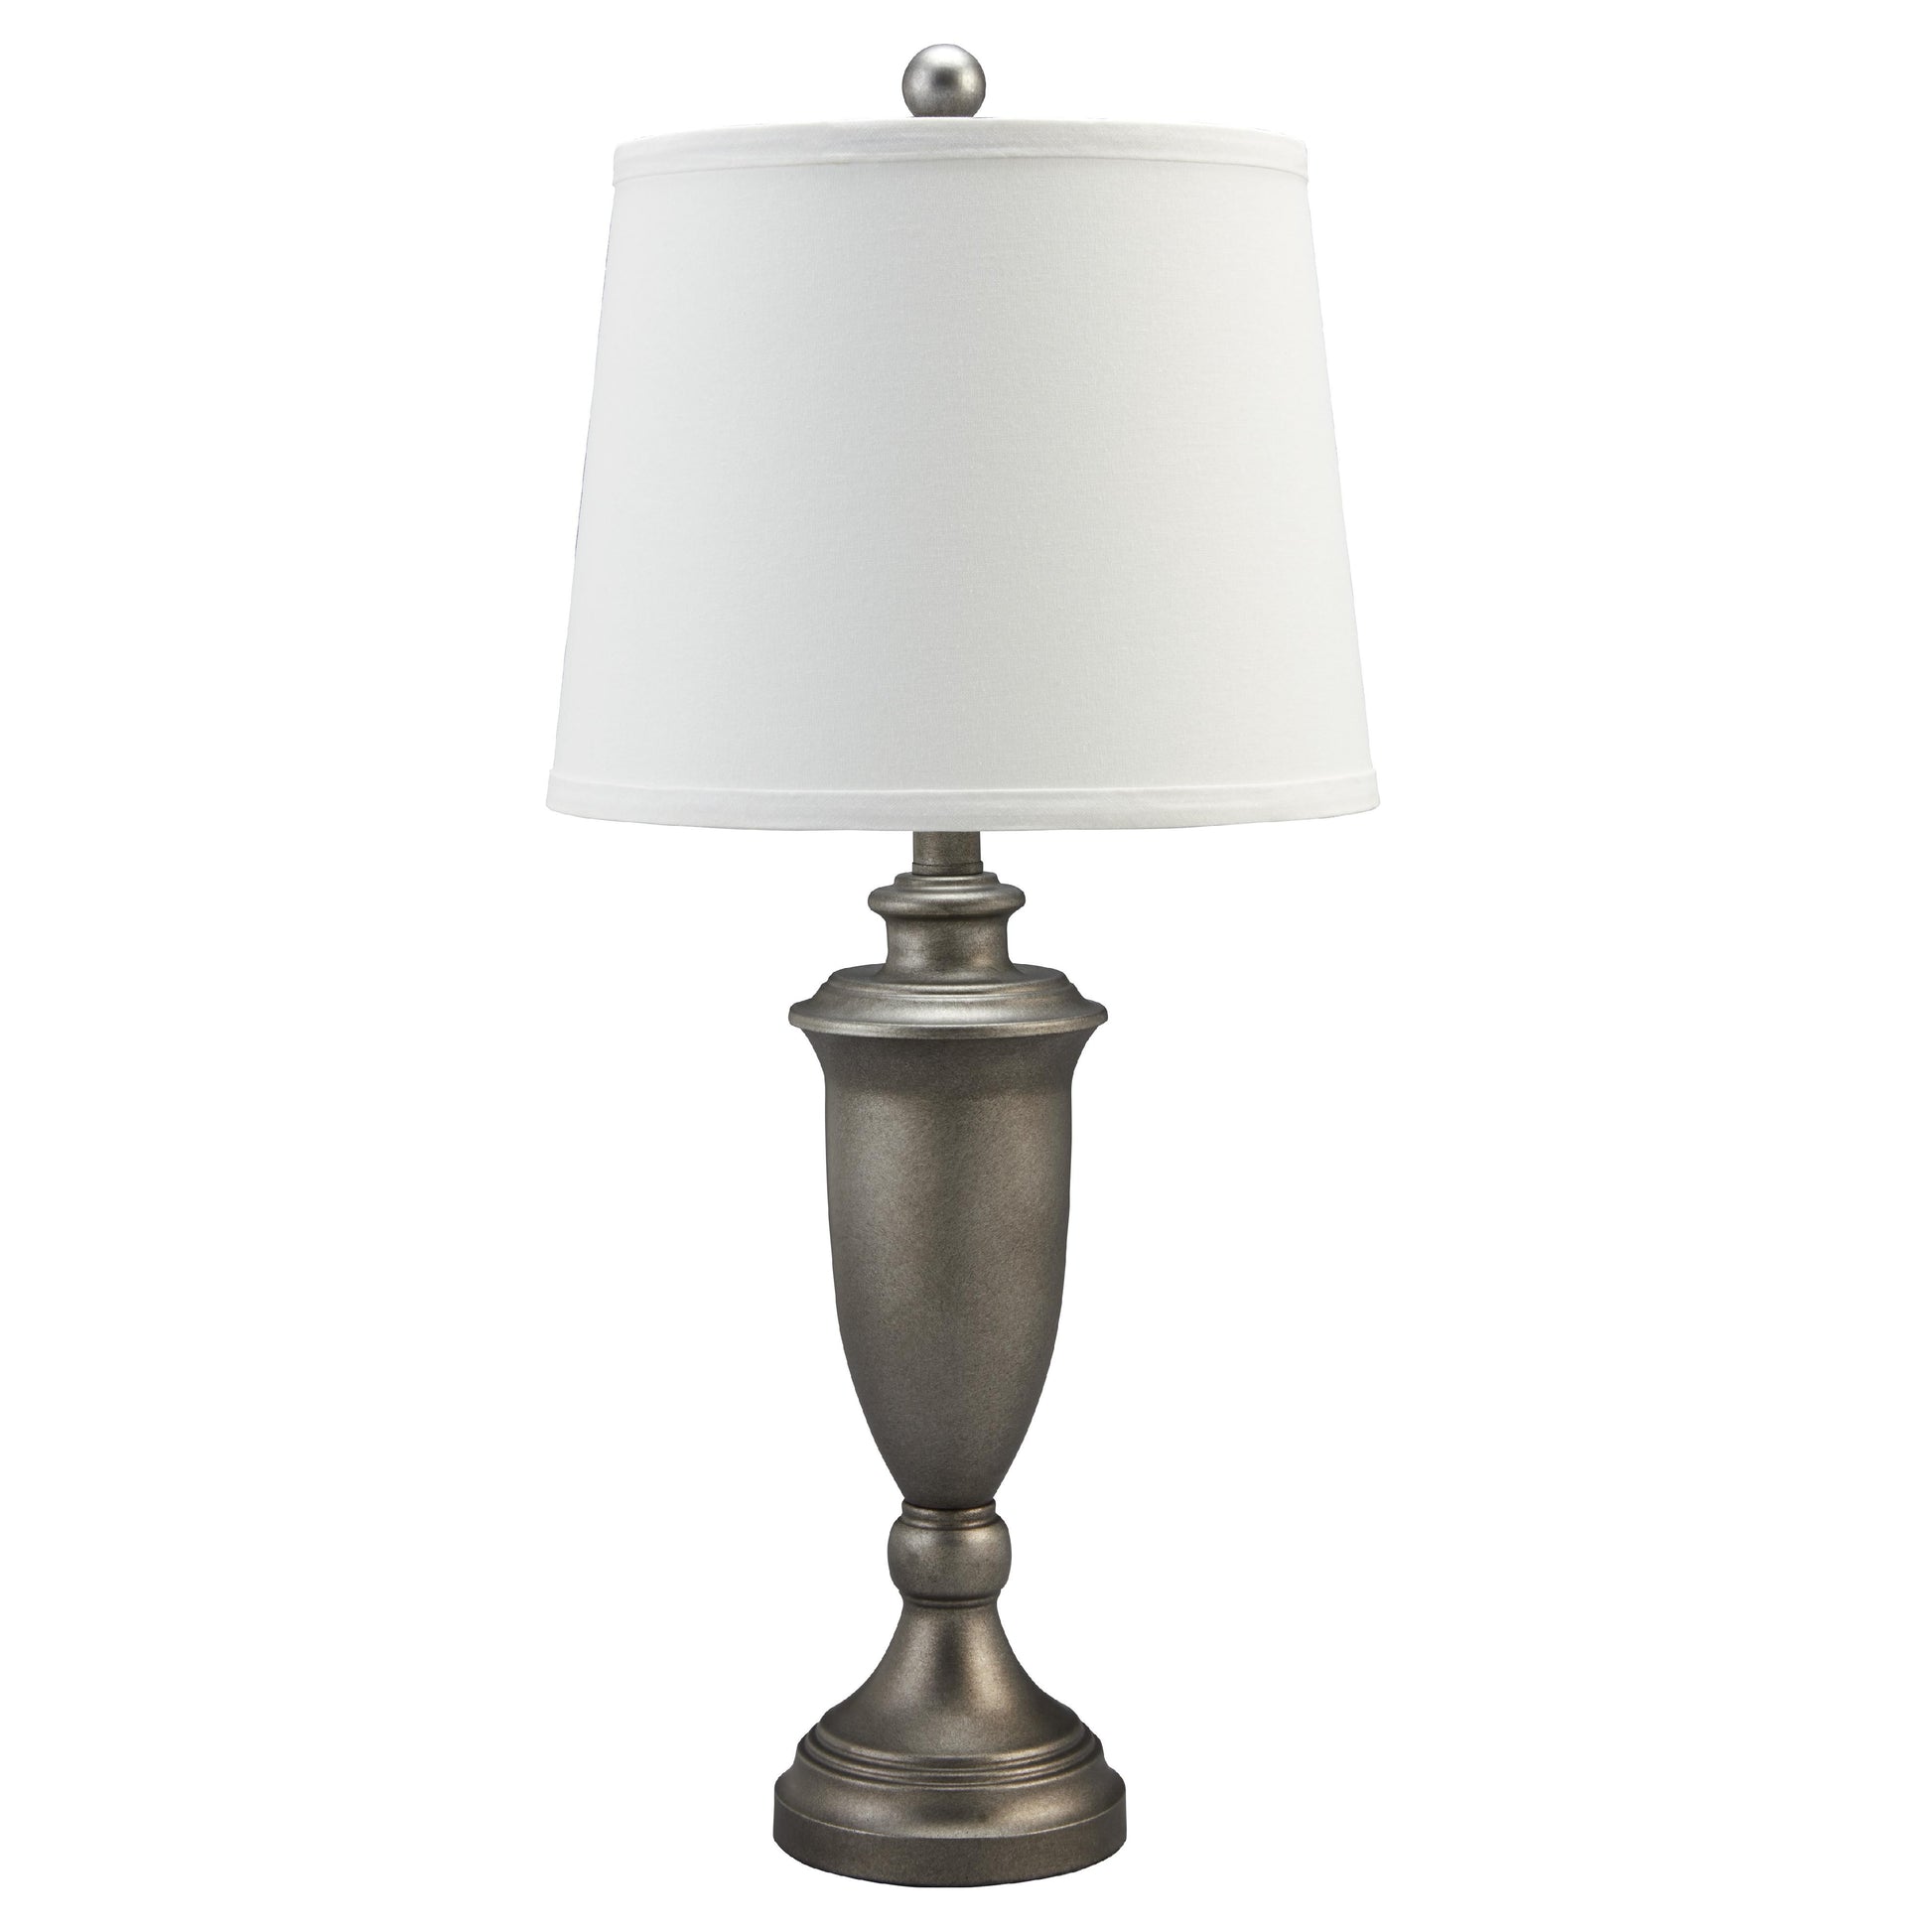 Signature Design by Ashley Doraley Table Lamp L204414 IMAGE 1